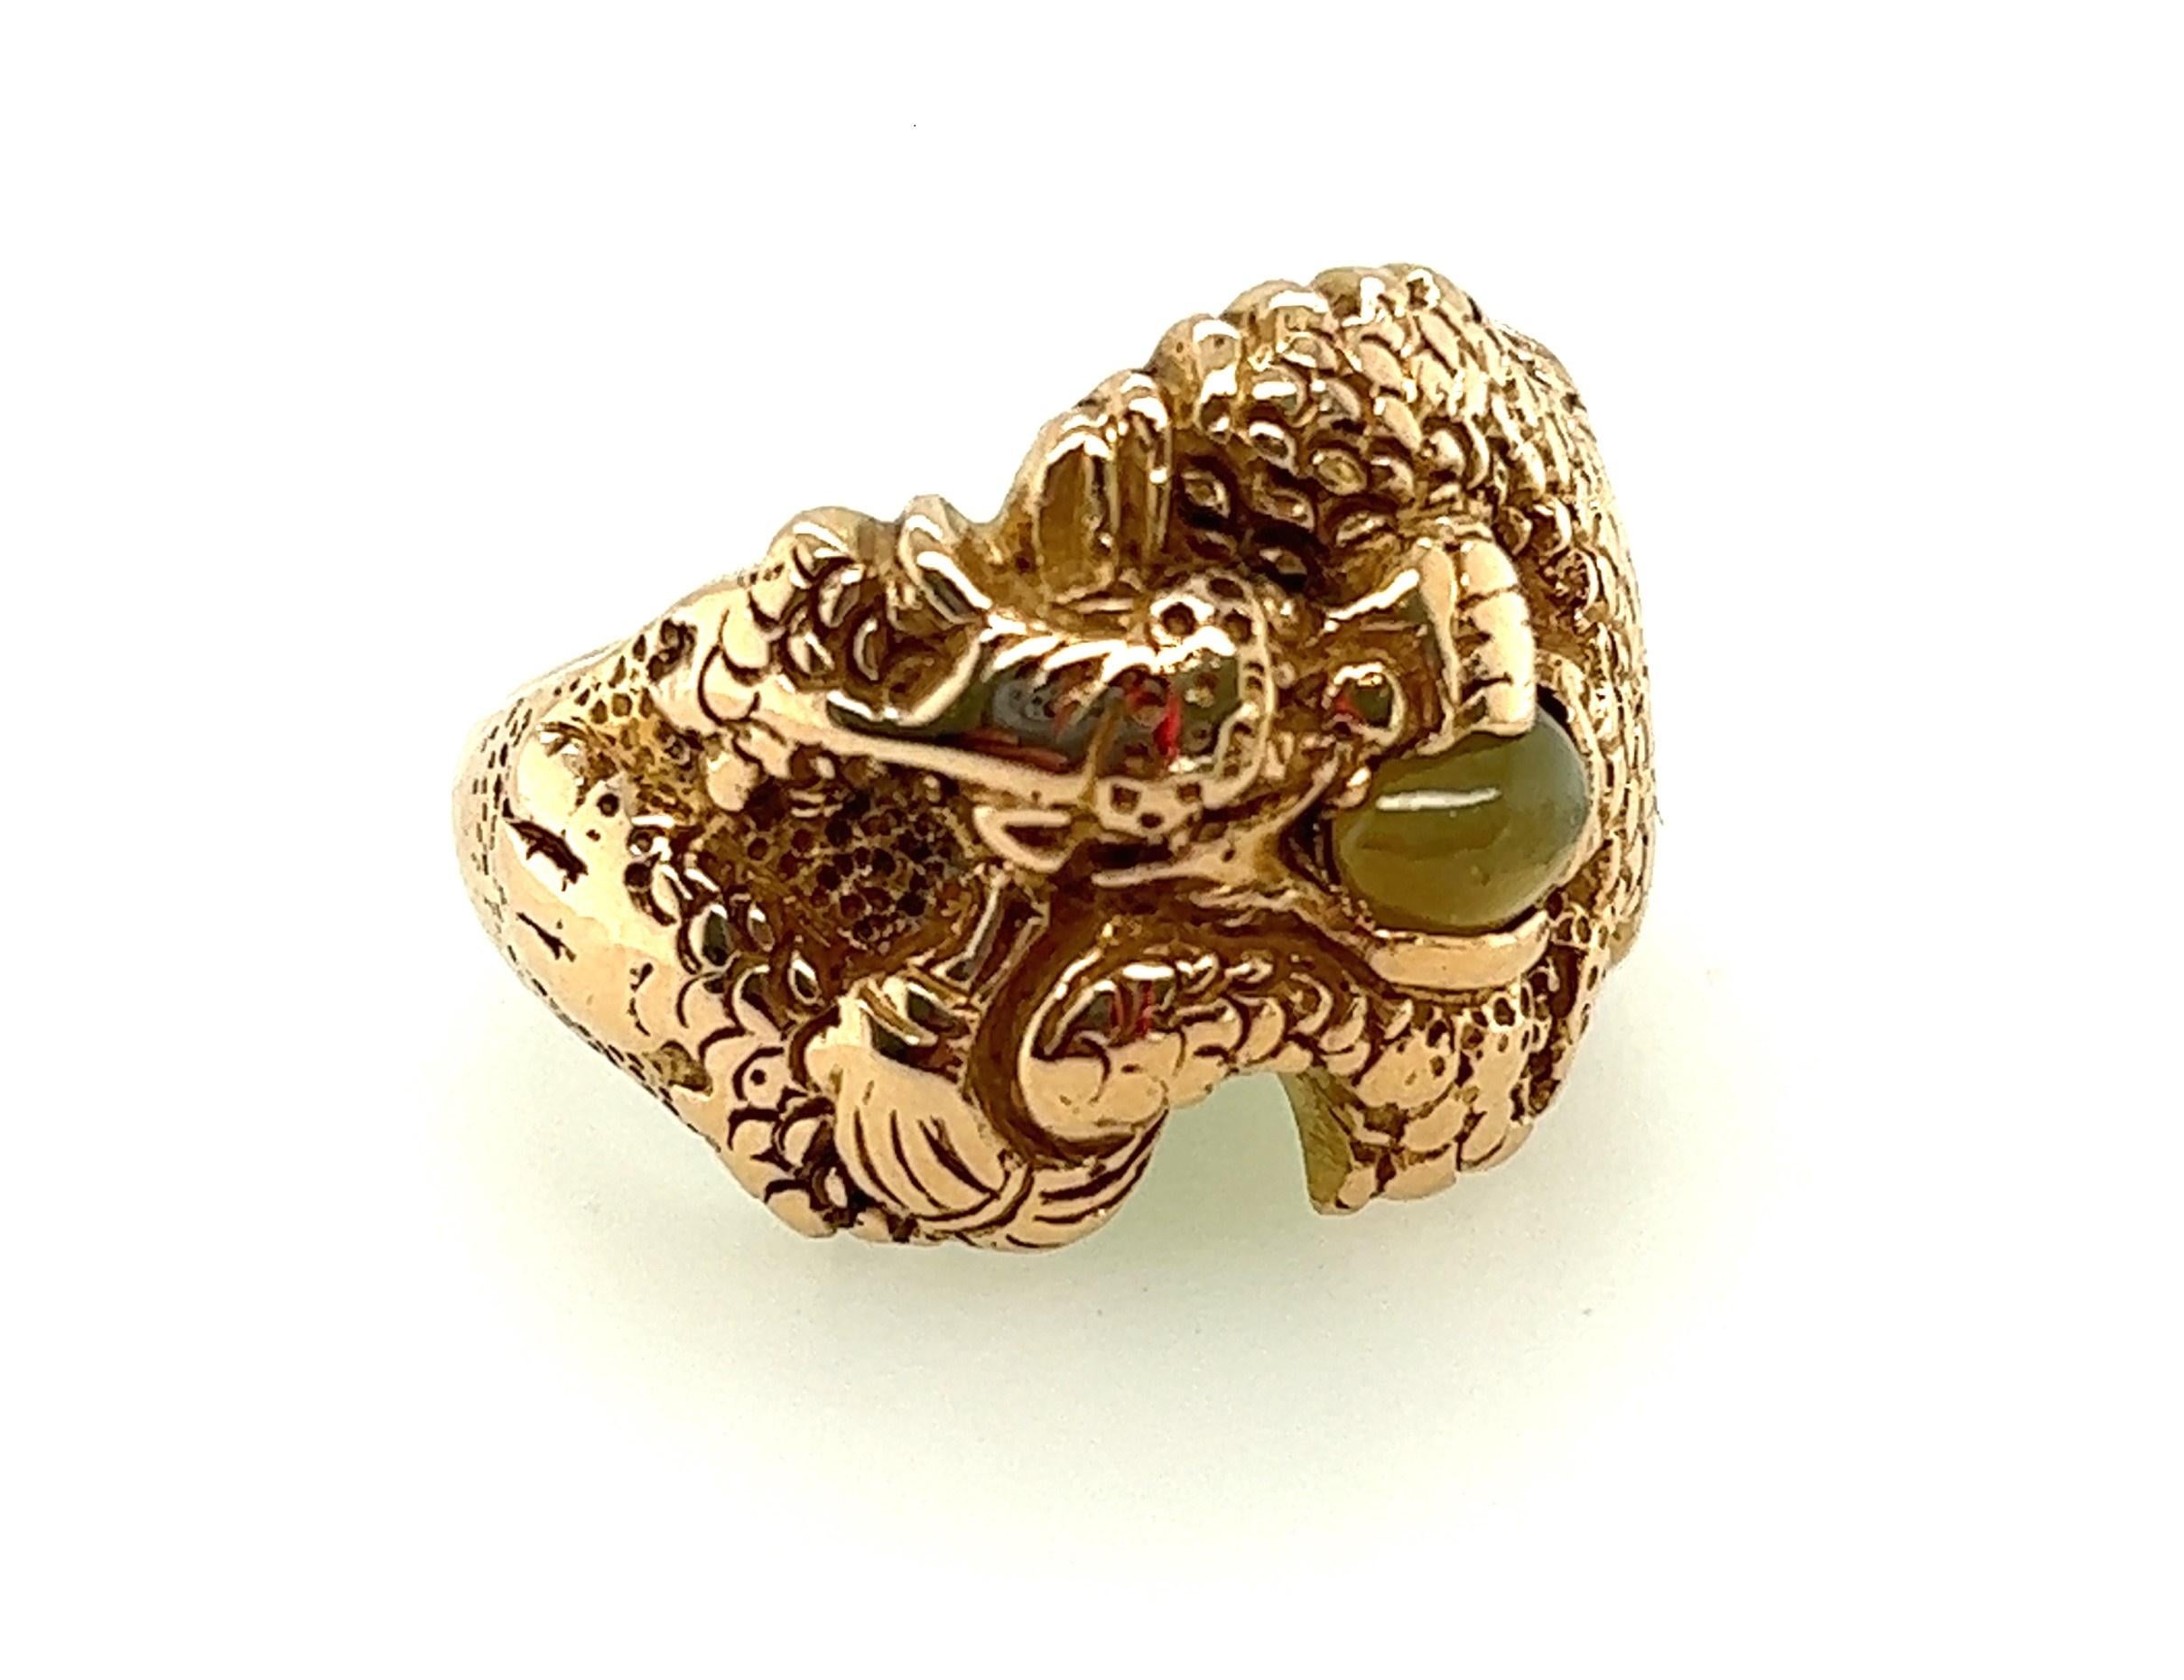 Just about the coolest dragon ring made from a world renowned Baltimore, MD jeweler, Carl Shcon. Carl Schon was designing and hand crafting jewelry in the early 20th century. The store was bought and the rights to his designs were passed on to the